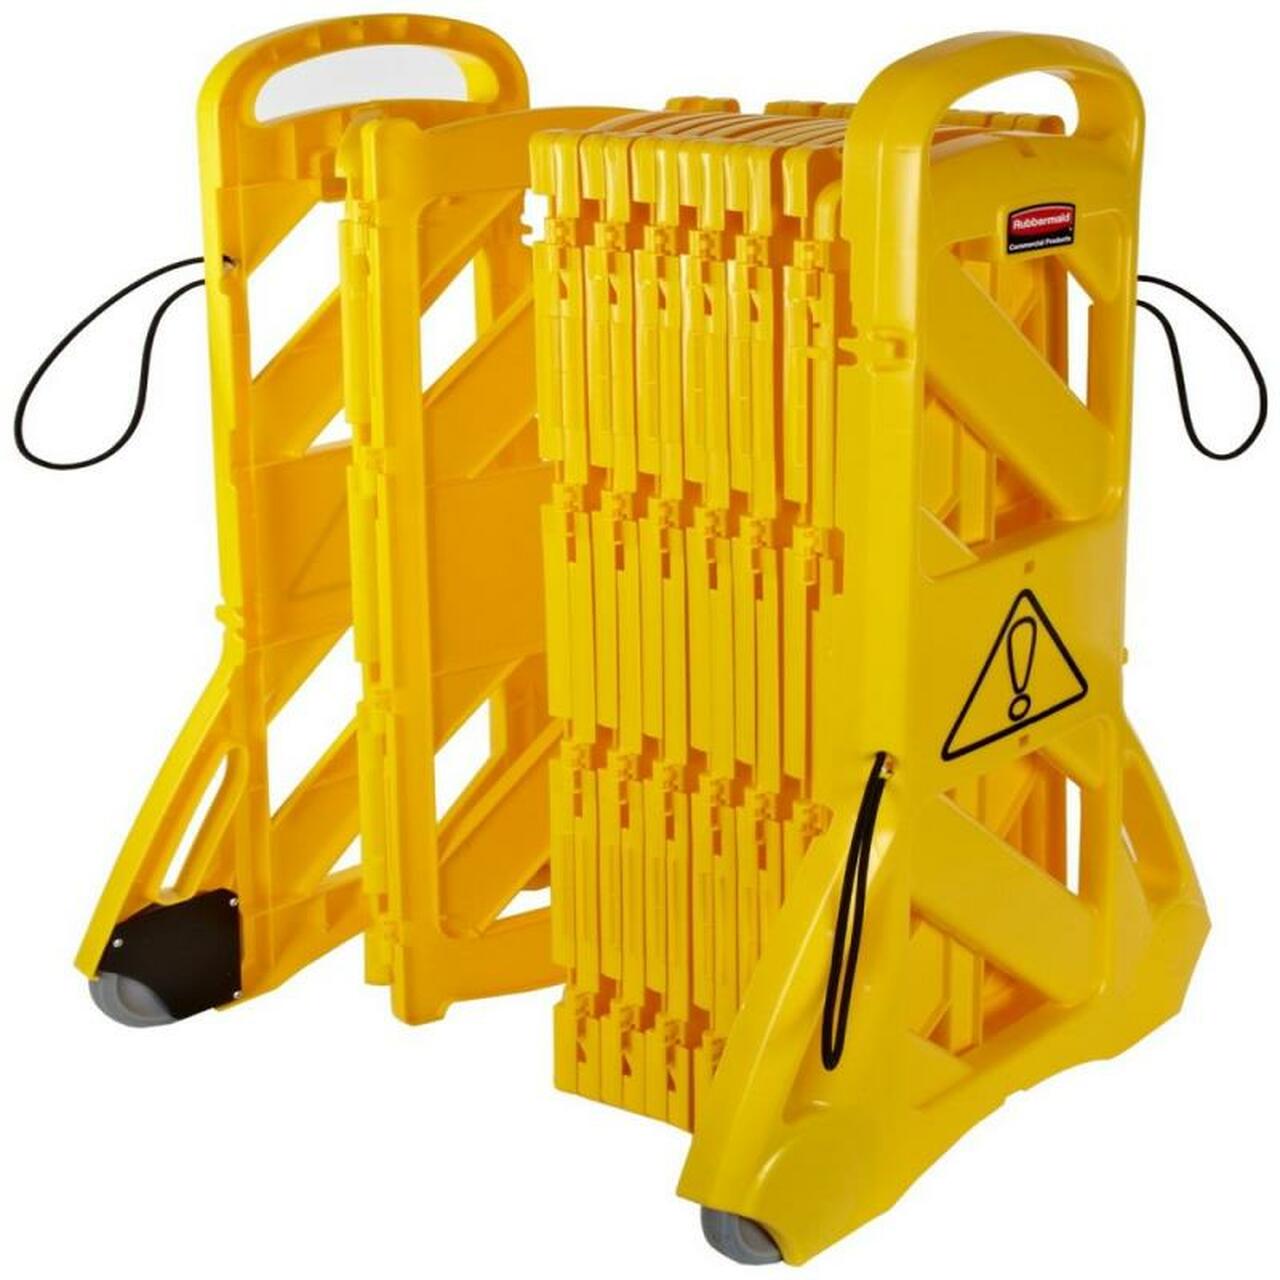 Goldenrod Yellow and Black Portable Safety Barrier